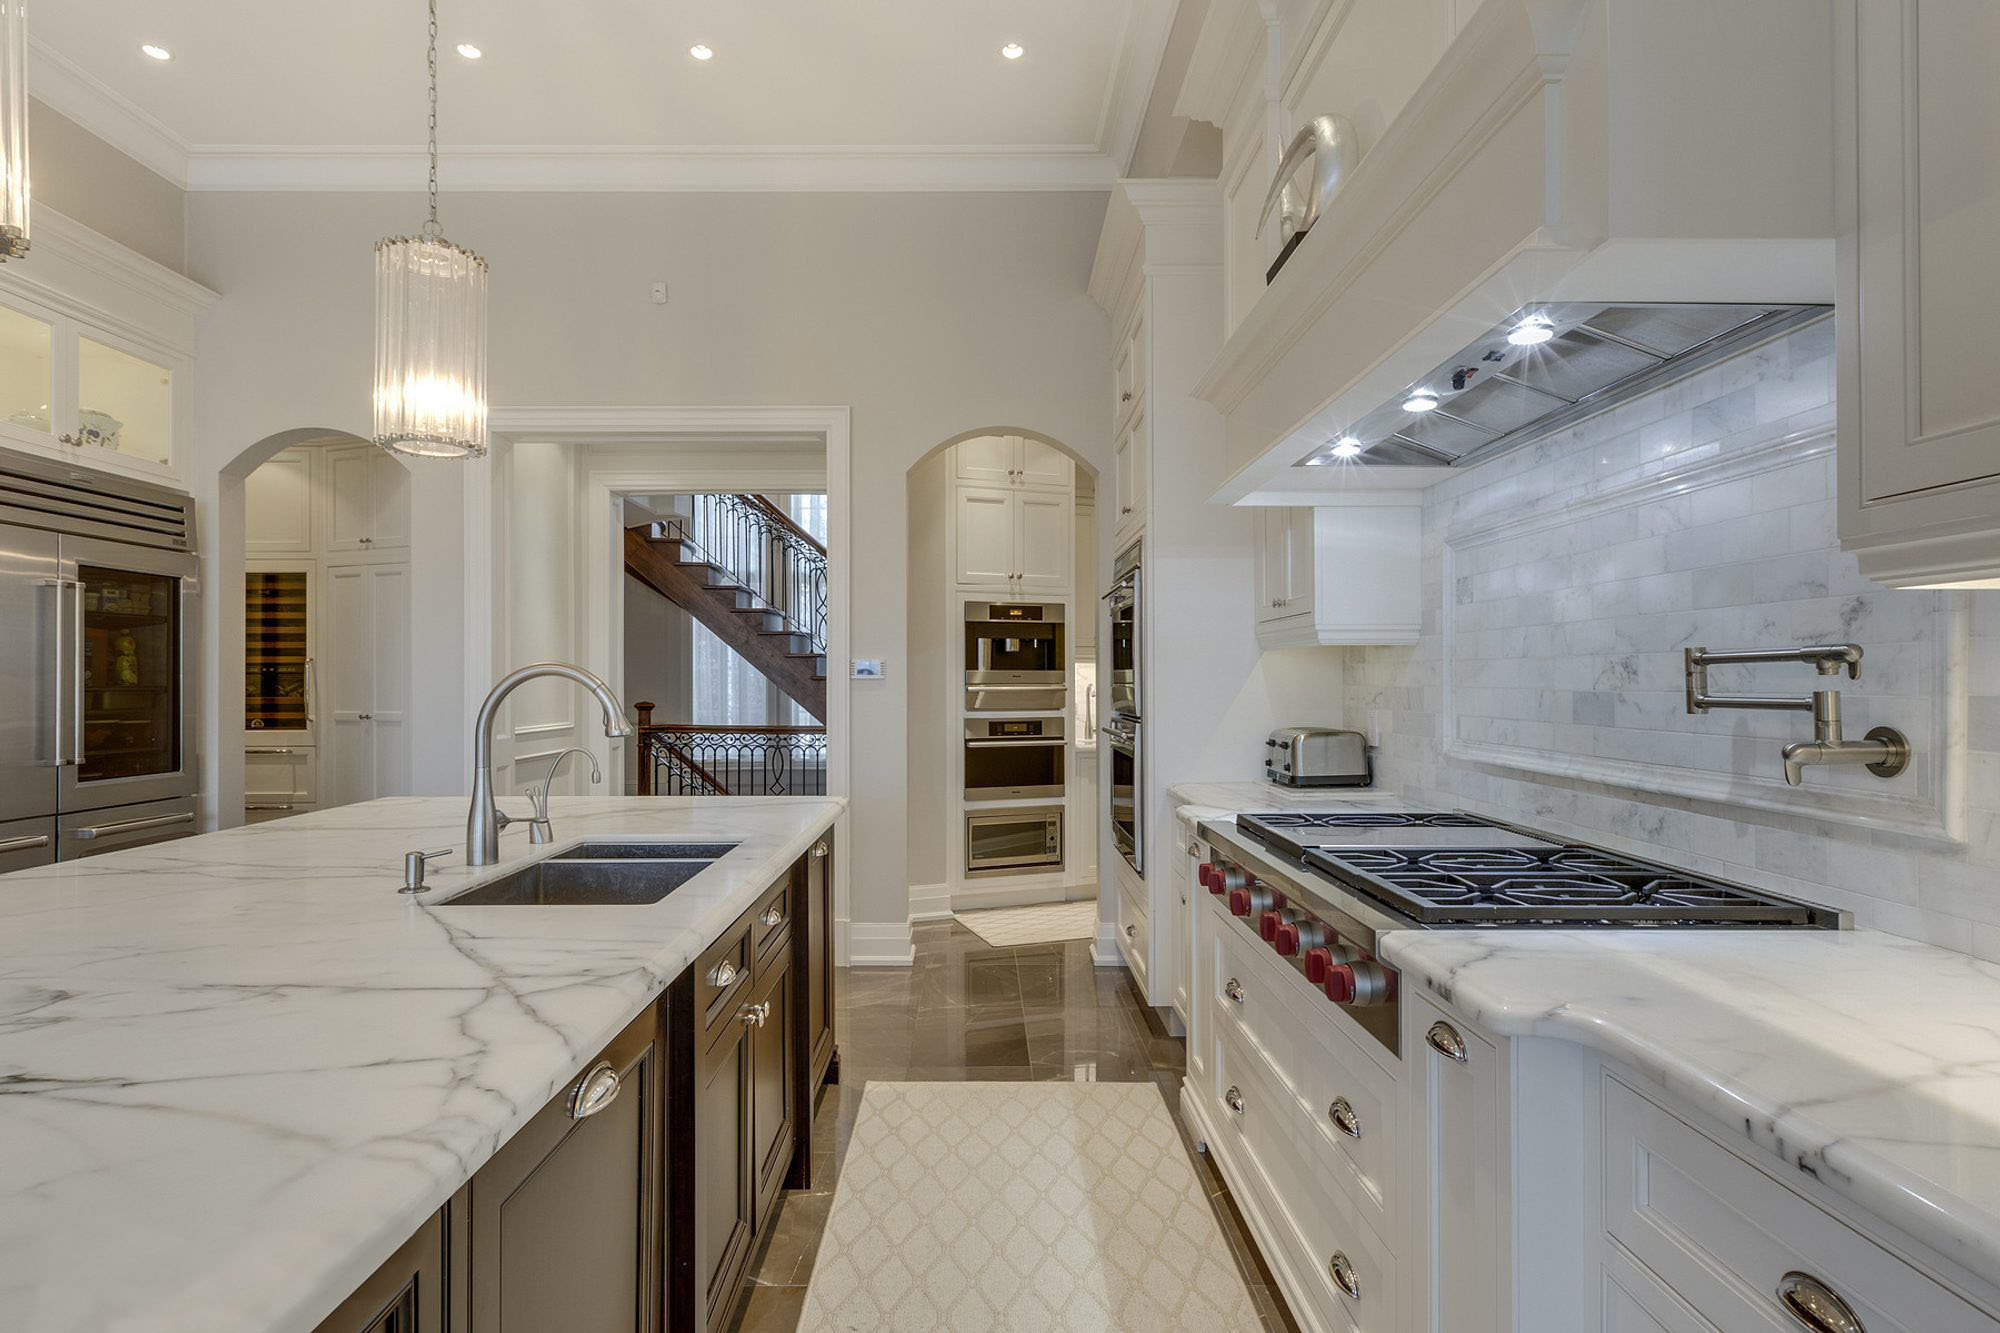 Marble kitchen counters with a deep gray vein.